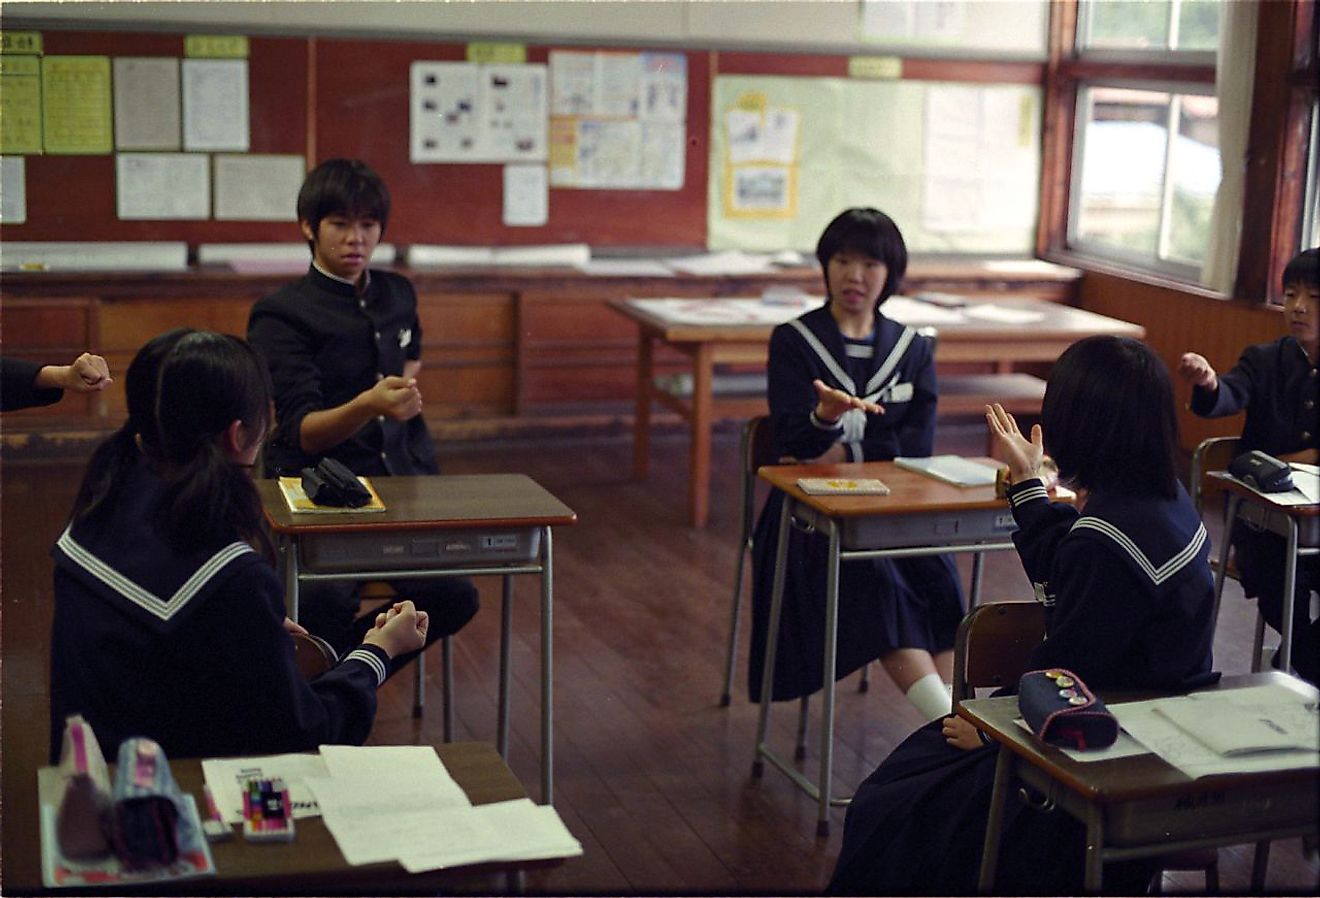 English class in Uta Junior High School, Japan. Image credit: Aka Hige from from Dento/Wikimedia.org